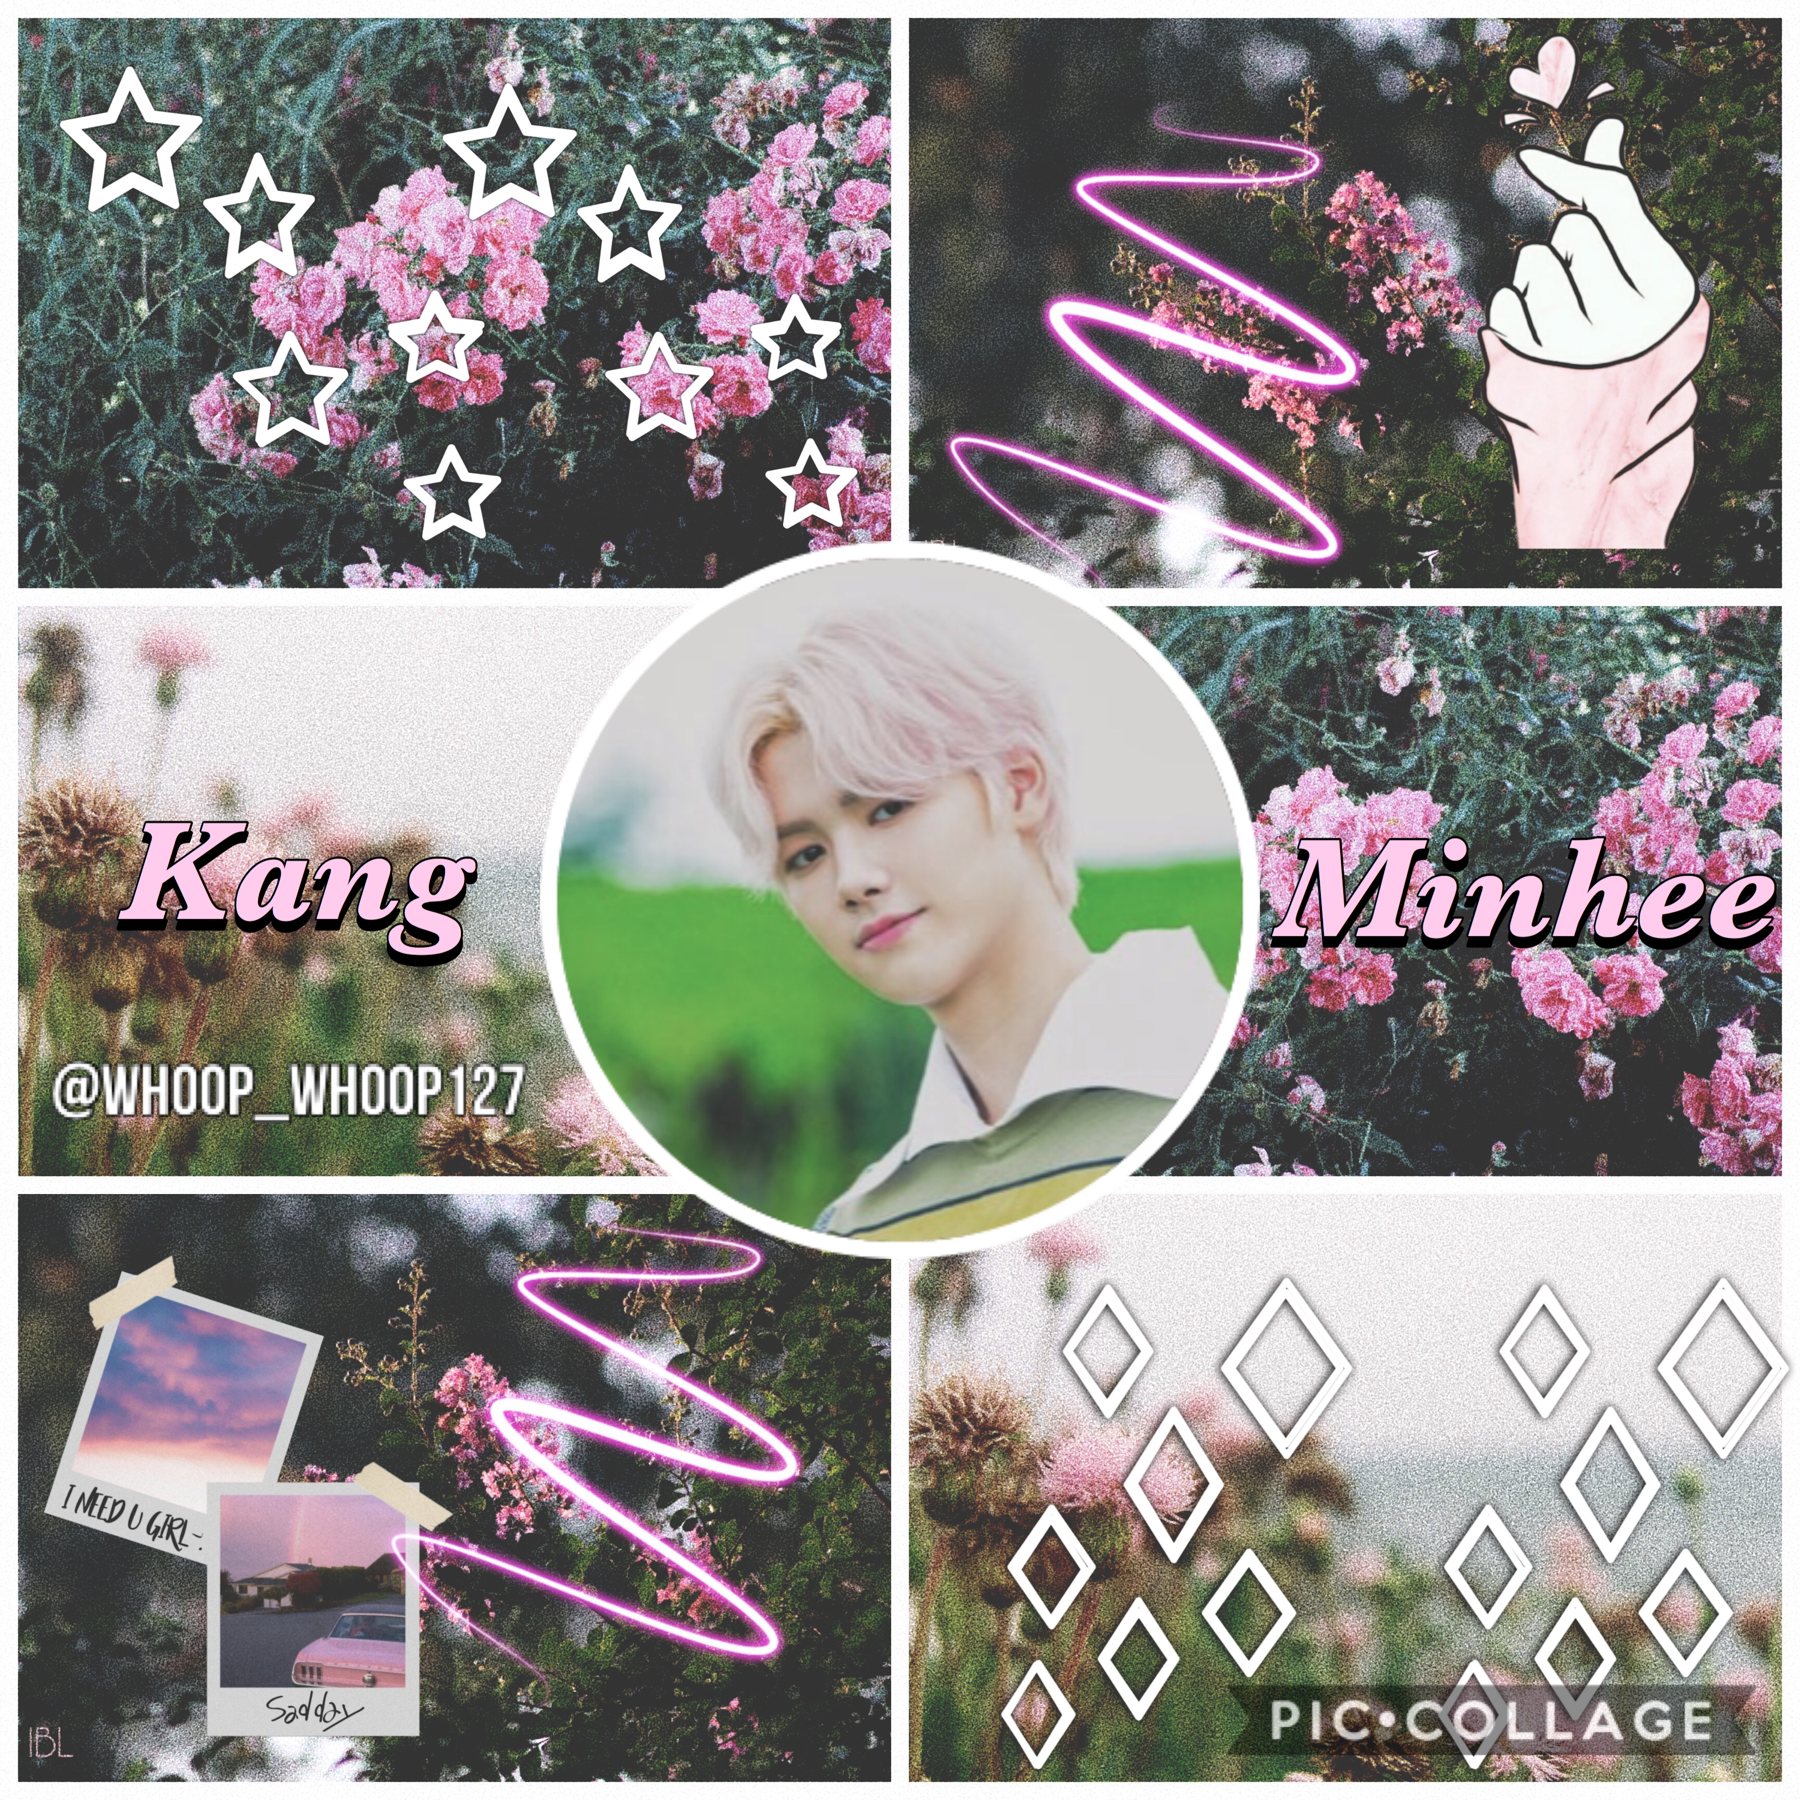 •🚒•
❄️Minhee~X1❄️
HI GUYS IM ALIVE! I really need to start editing more on this account 😭🥺❤️ If y’all have tik tok plz follow @dundundimple:)
Love youuuu❤️💞❤️💞❤️